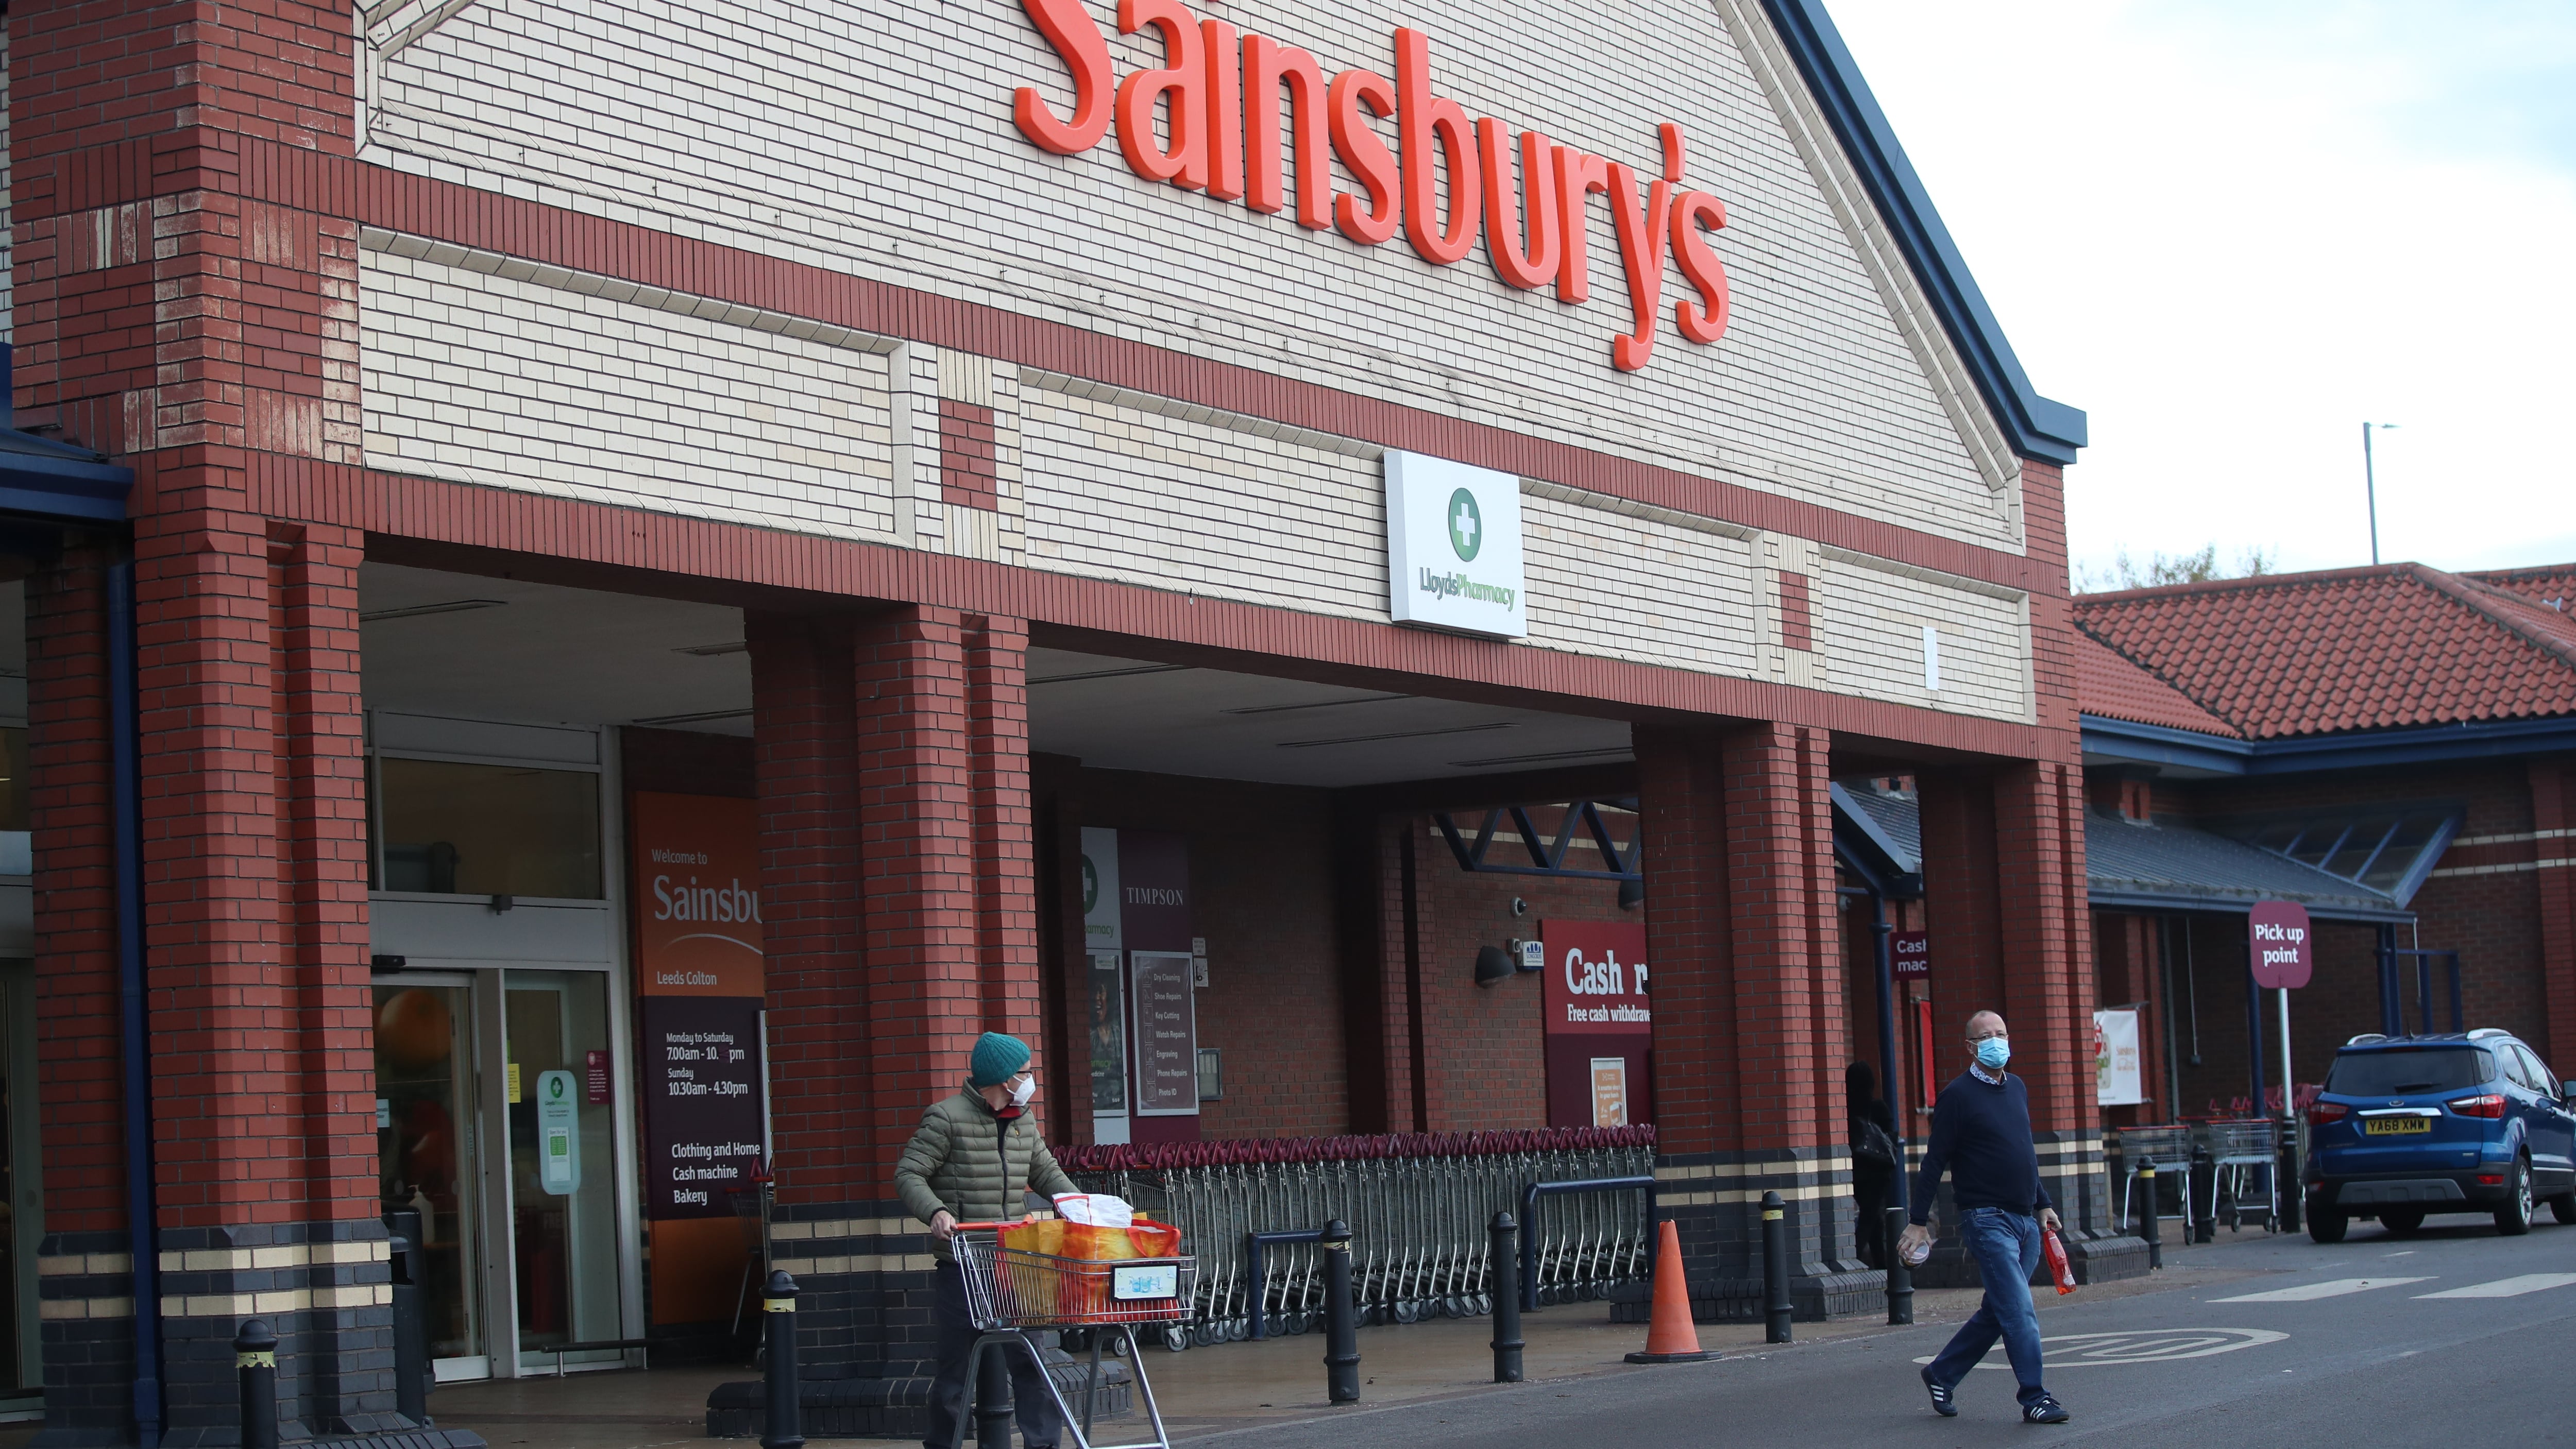 Sainsbury’s announced in January it was winding down its banking division to focus on its retail business